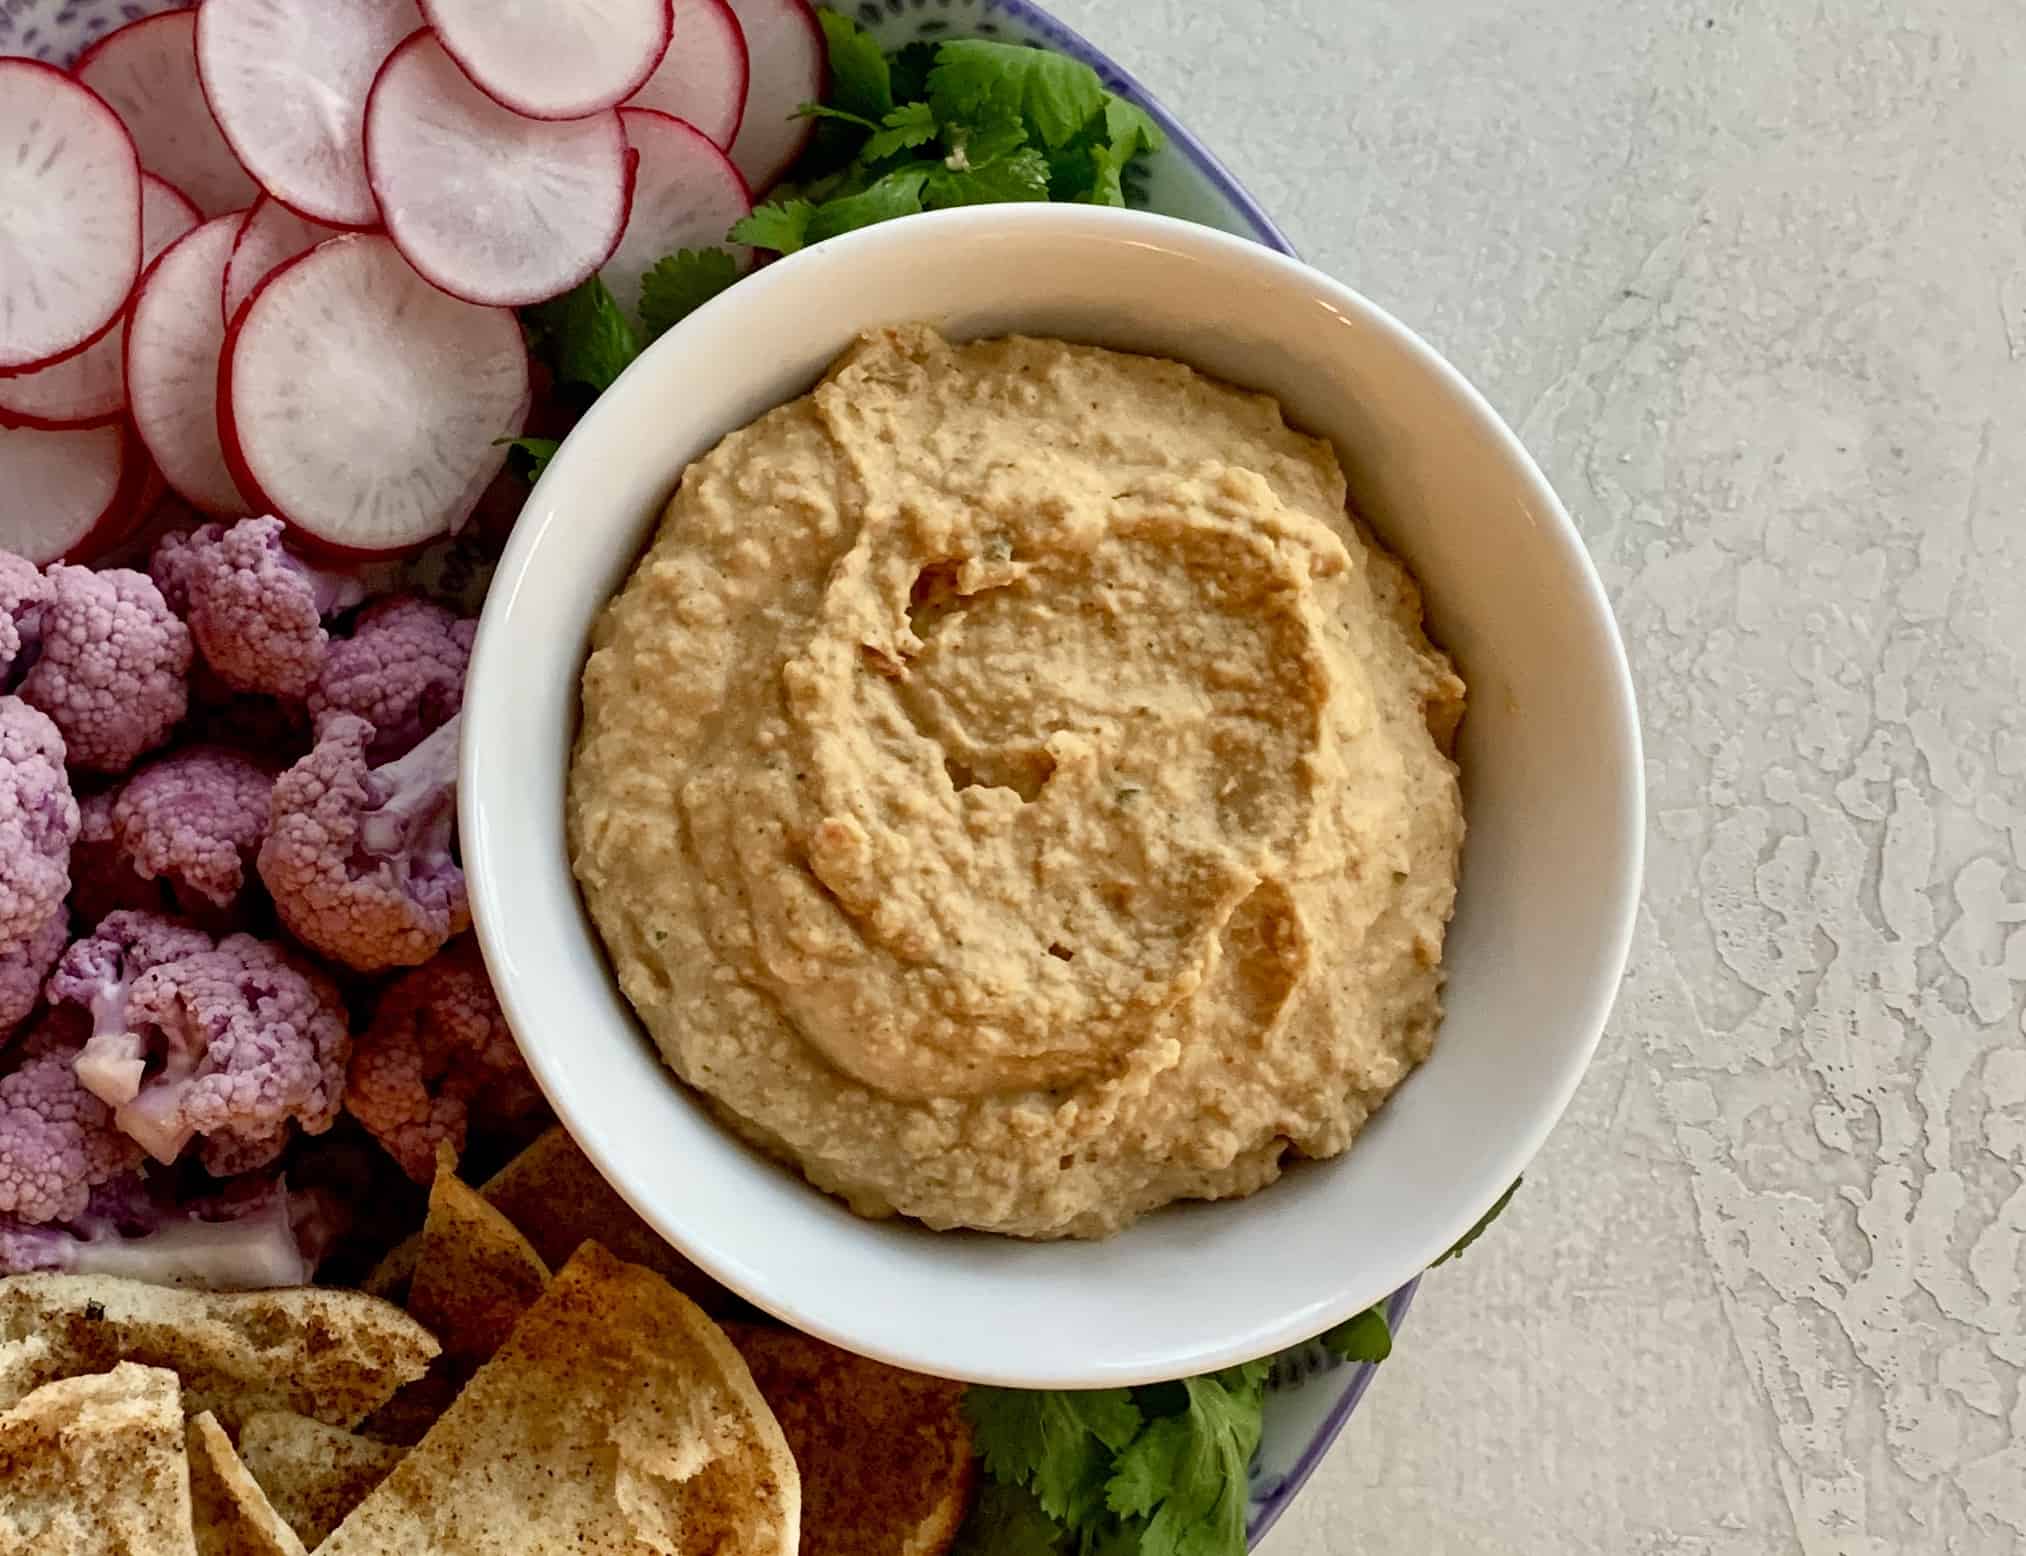 Finished hummus in a bowl